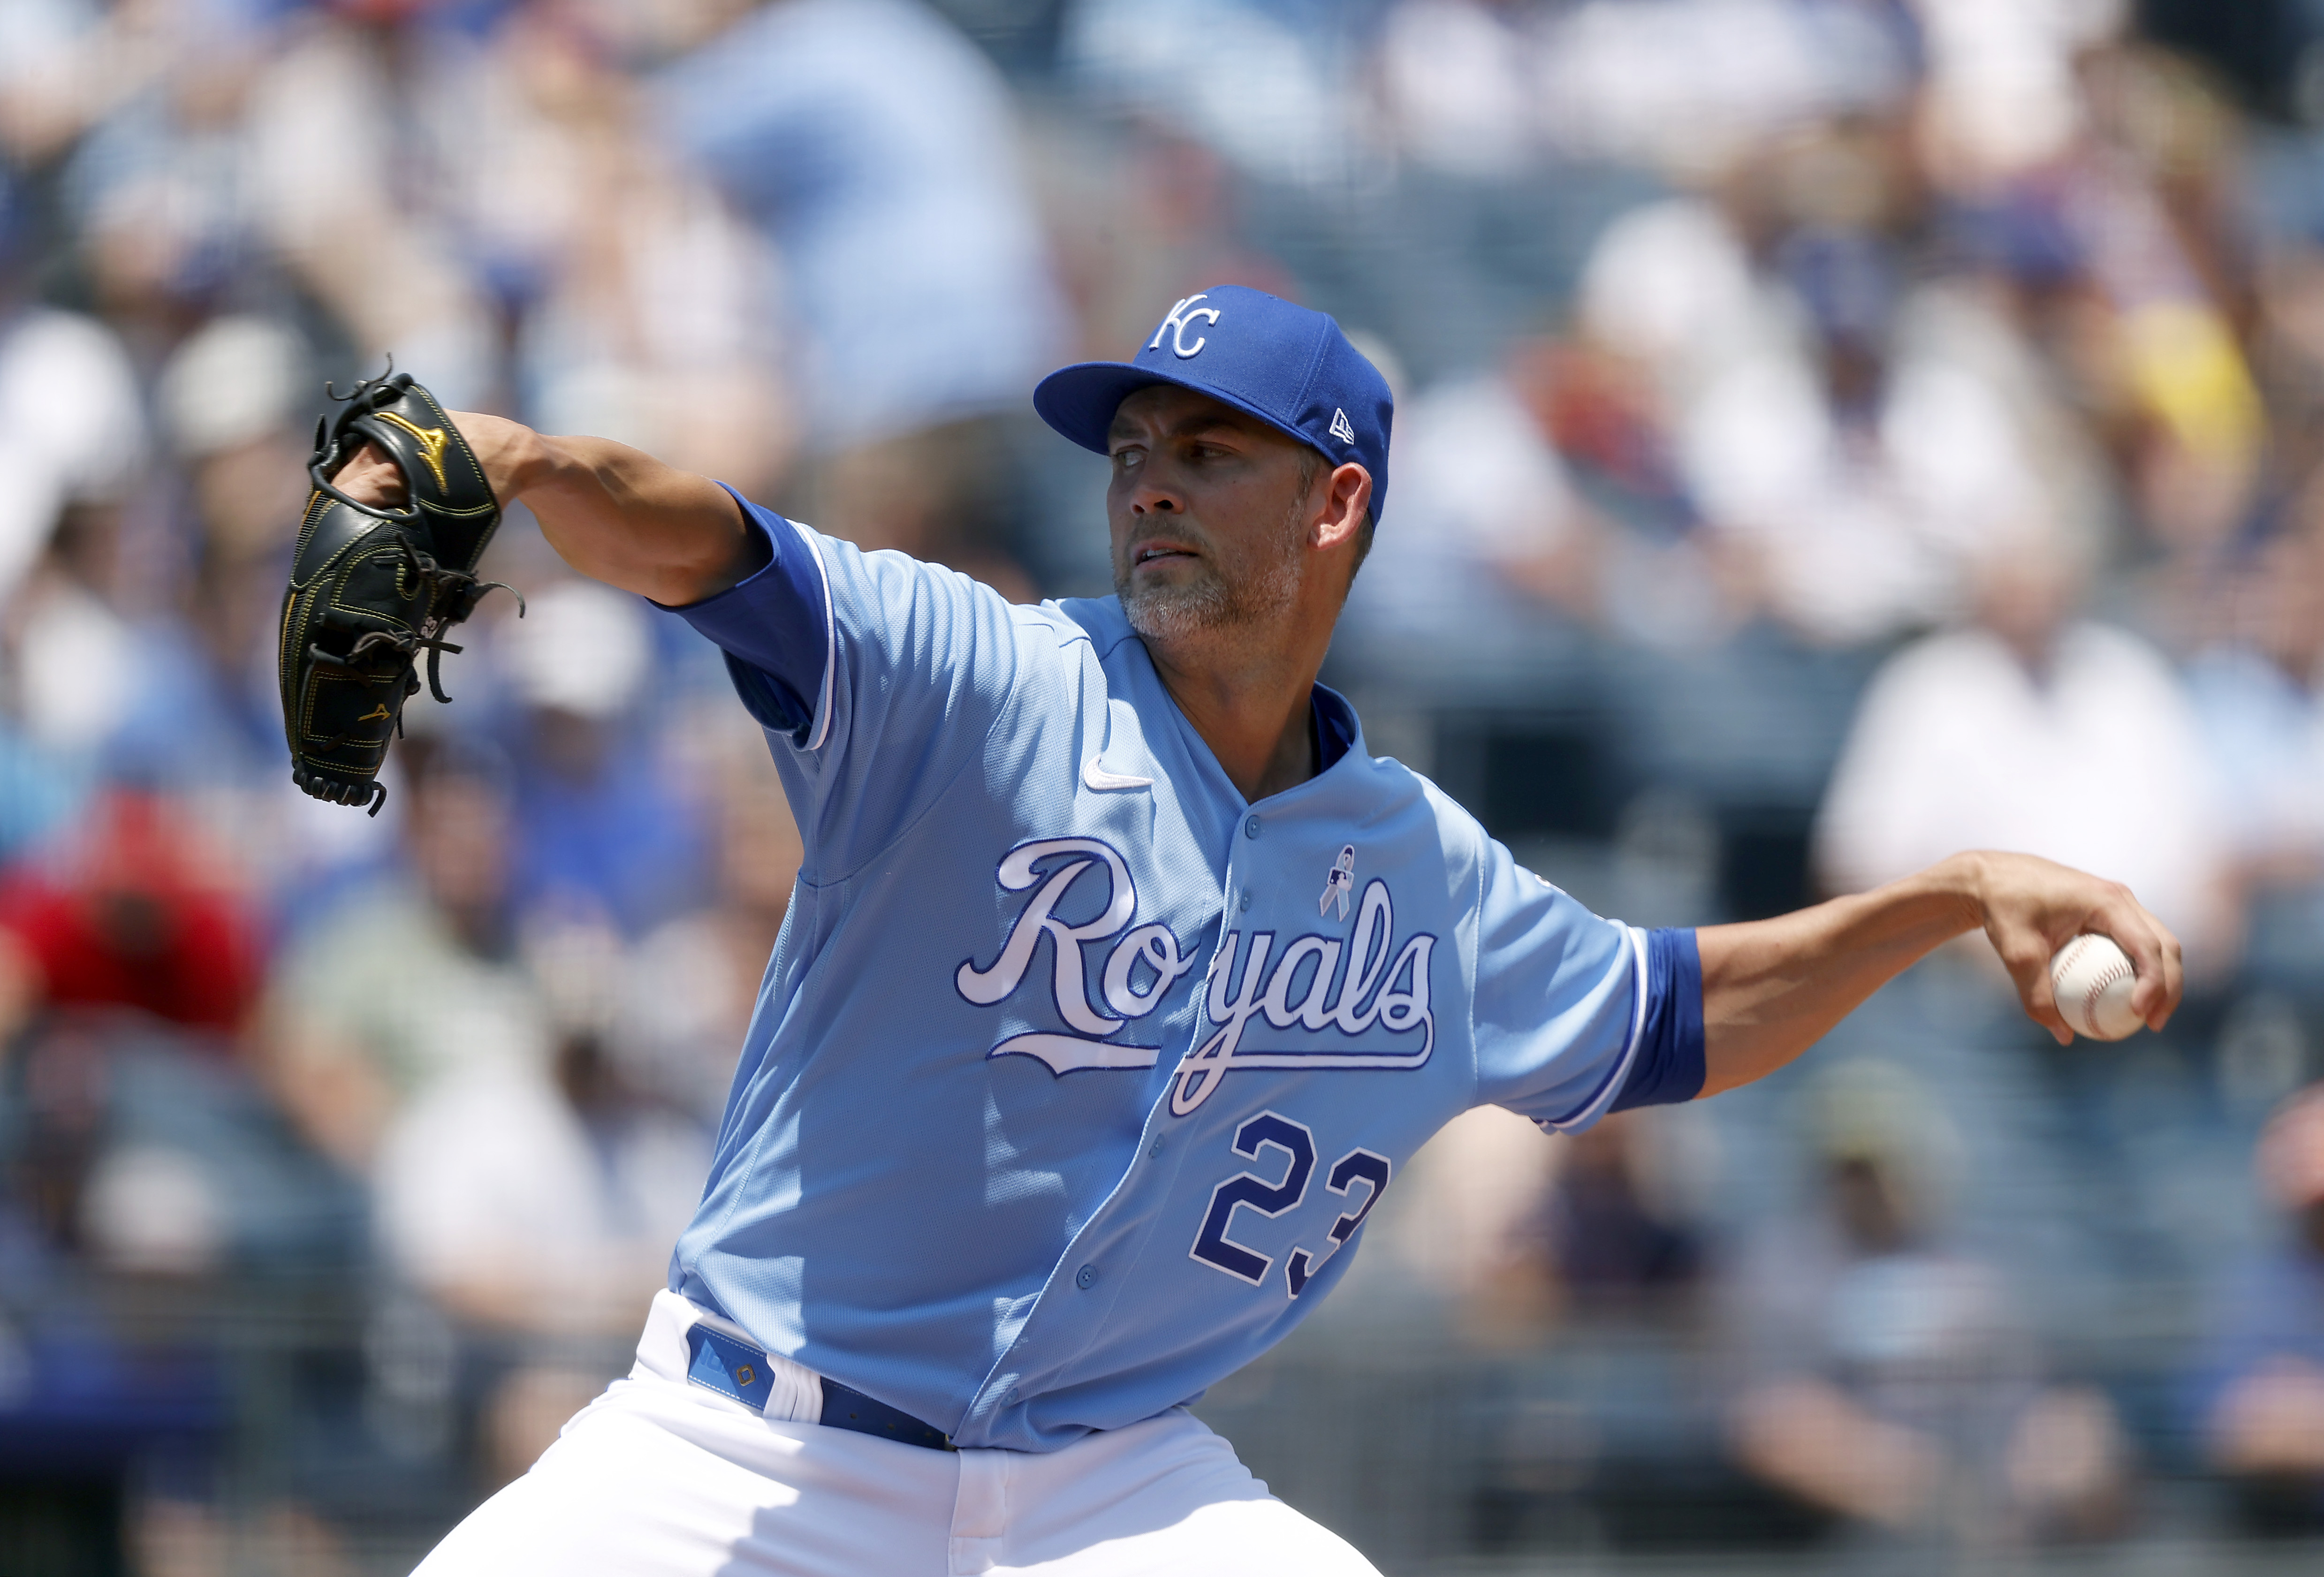 Starting pitcher Mike Minor #23 of the Kansas City Royals pitches during the 1st inning of the game against the Boston Red Sox at Kauffman Stadium on June 20, 2021 in Kansas City, Missouri.